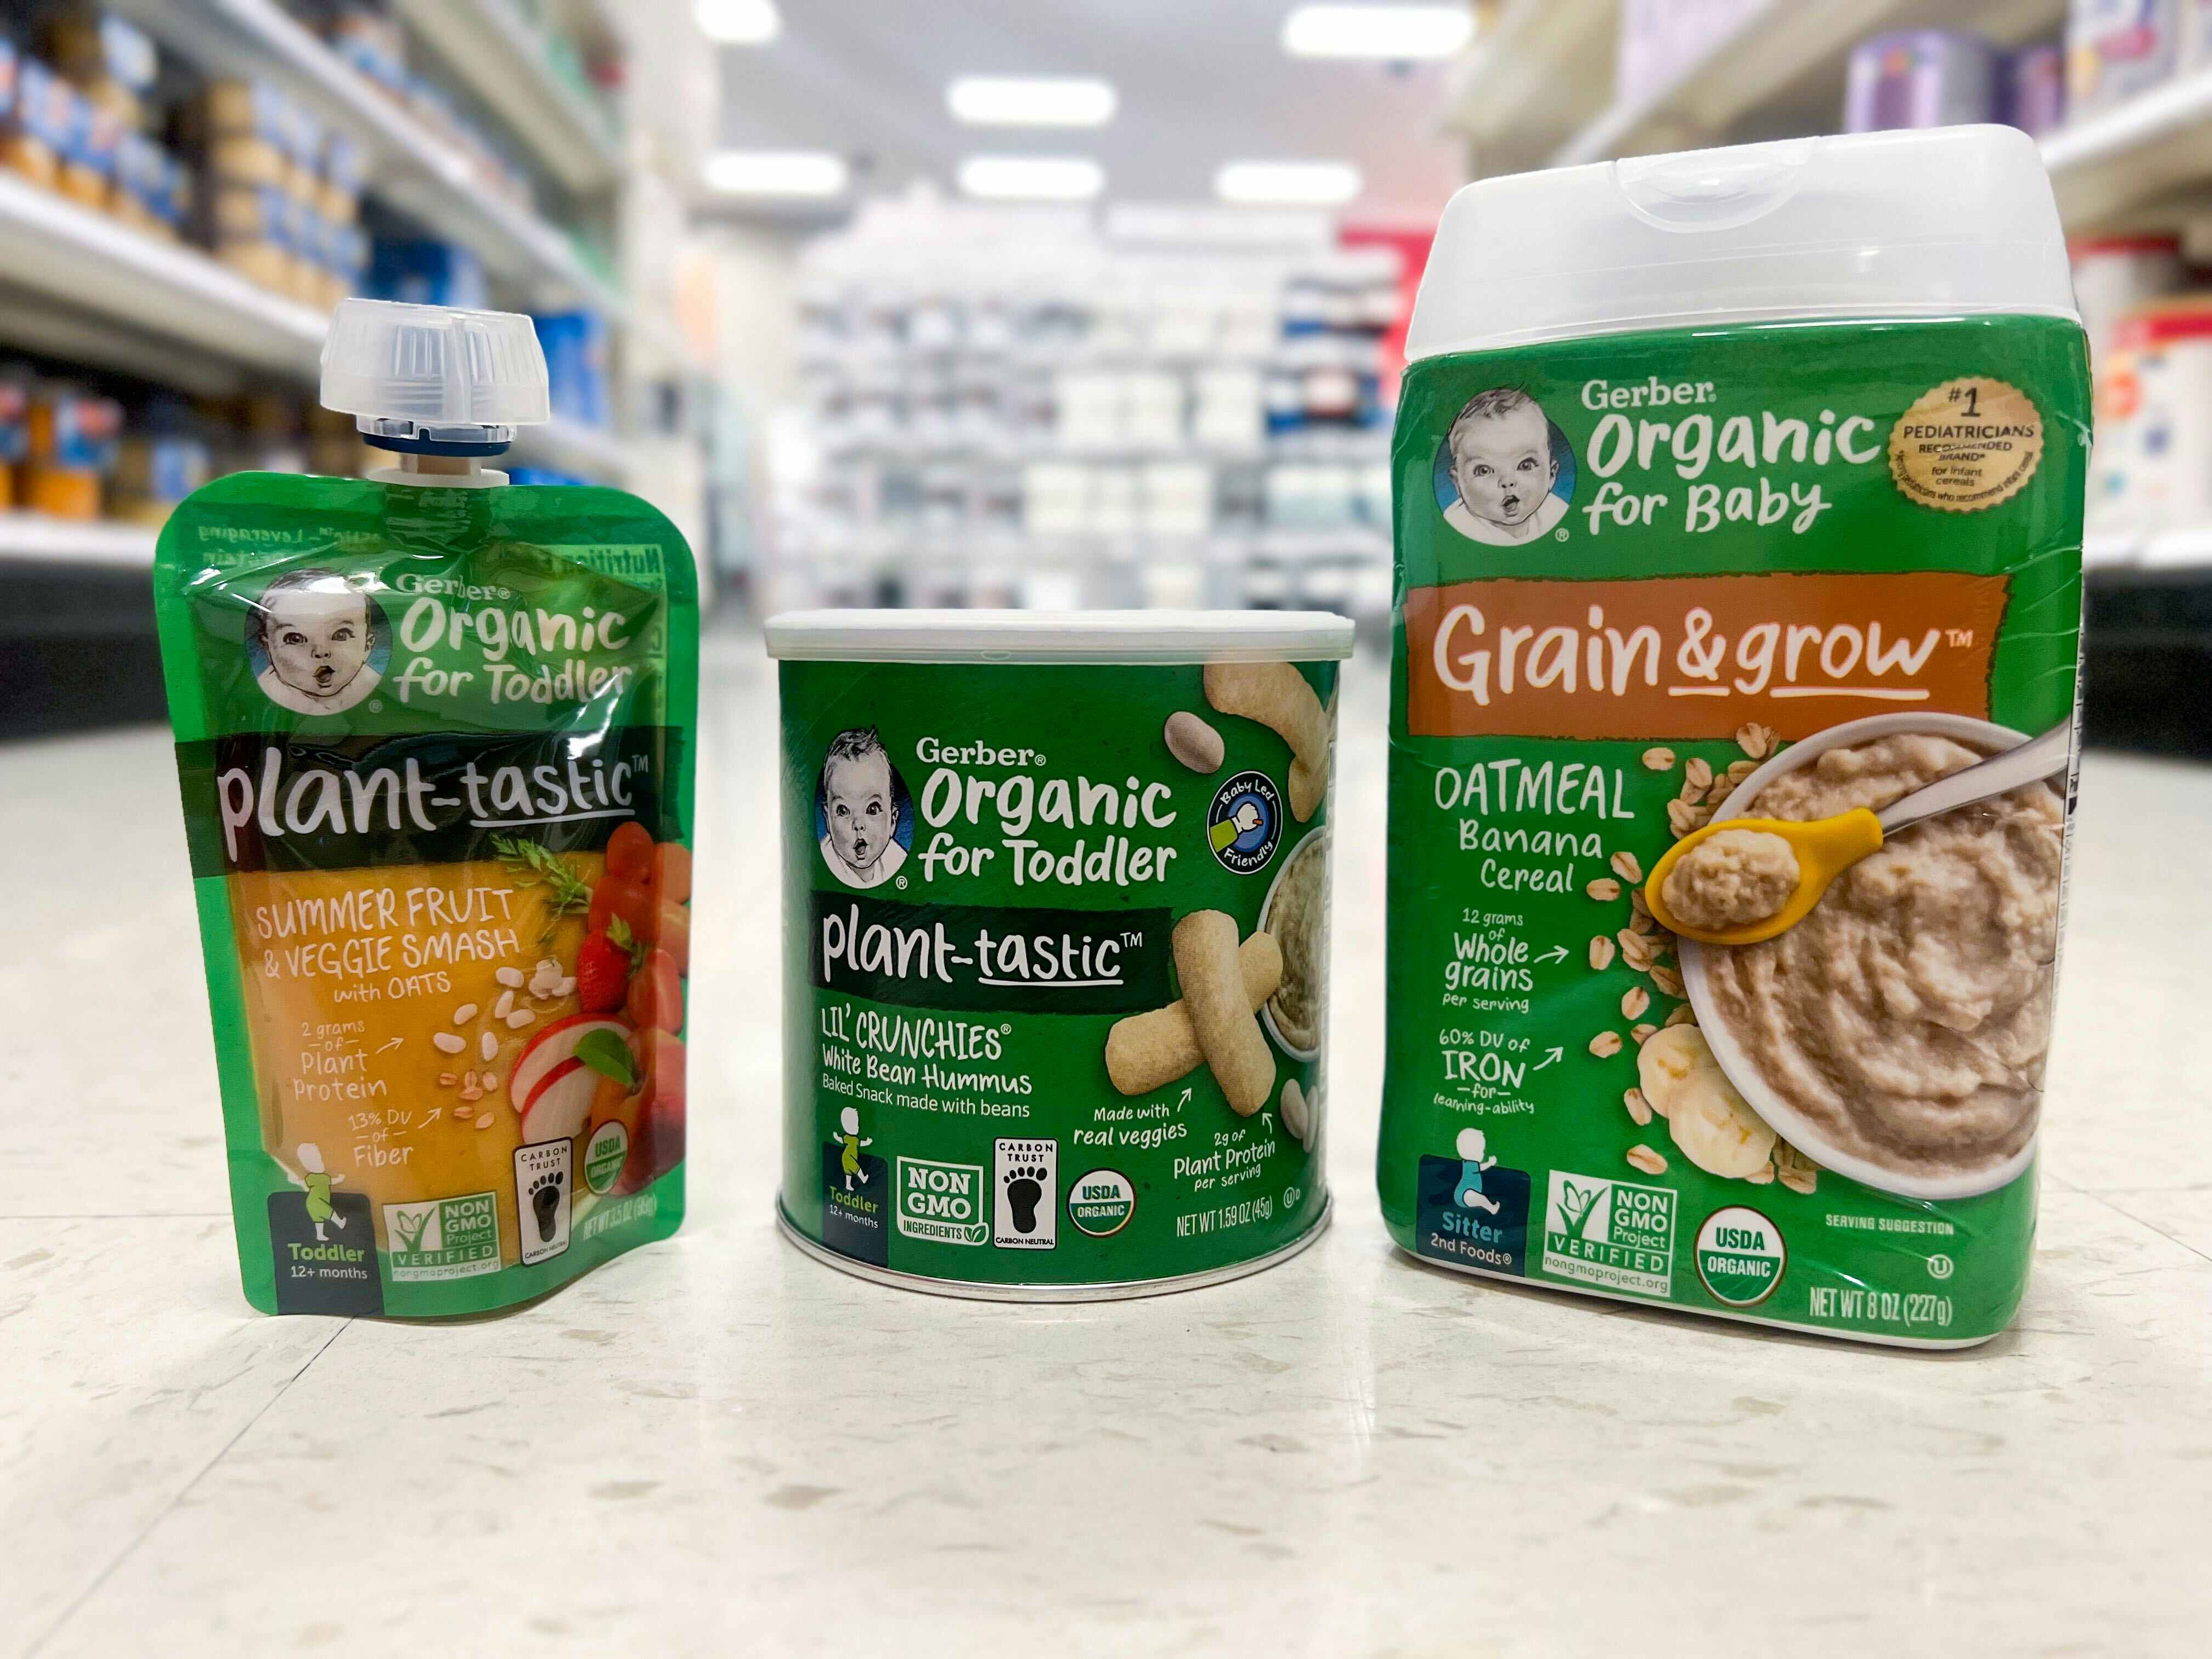 Three Gerber Organic baby products lined up on the supermarket floor: Oatmeal banana cereal, plant-tastic lil' crunchies, and plant-tastic summer fruit and veggie smash with oats